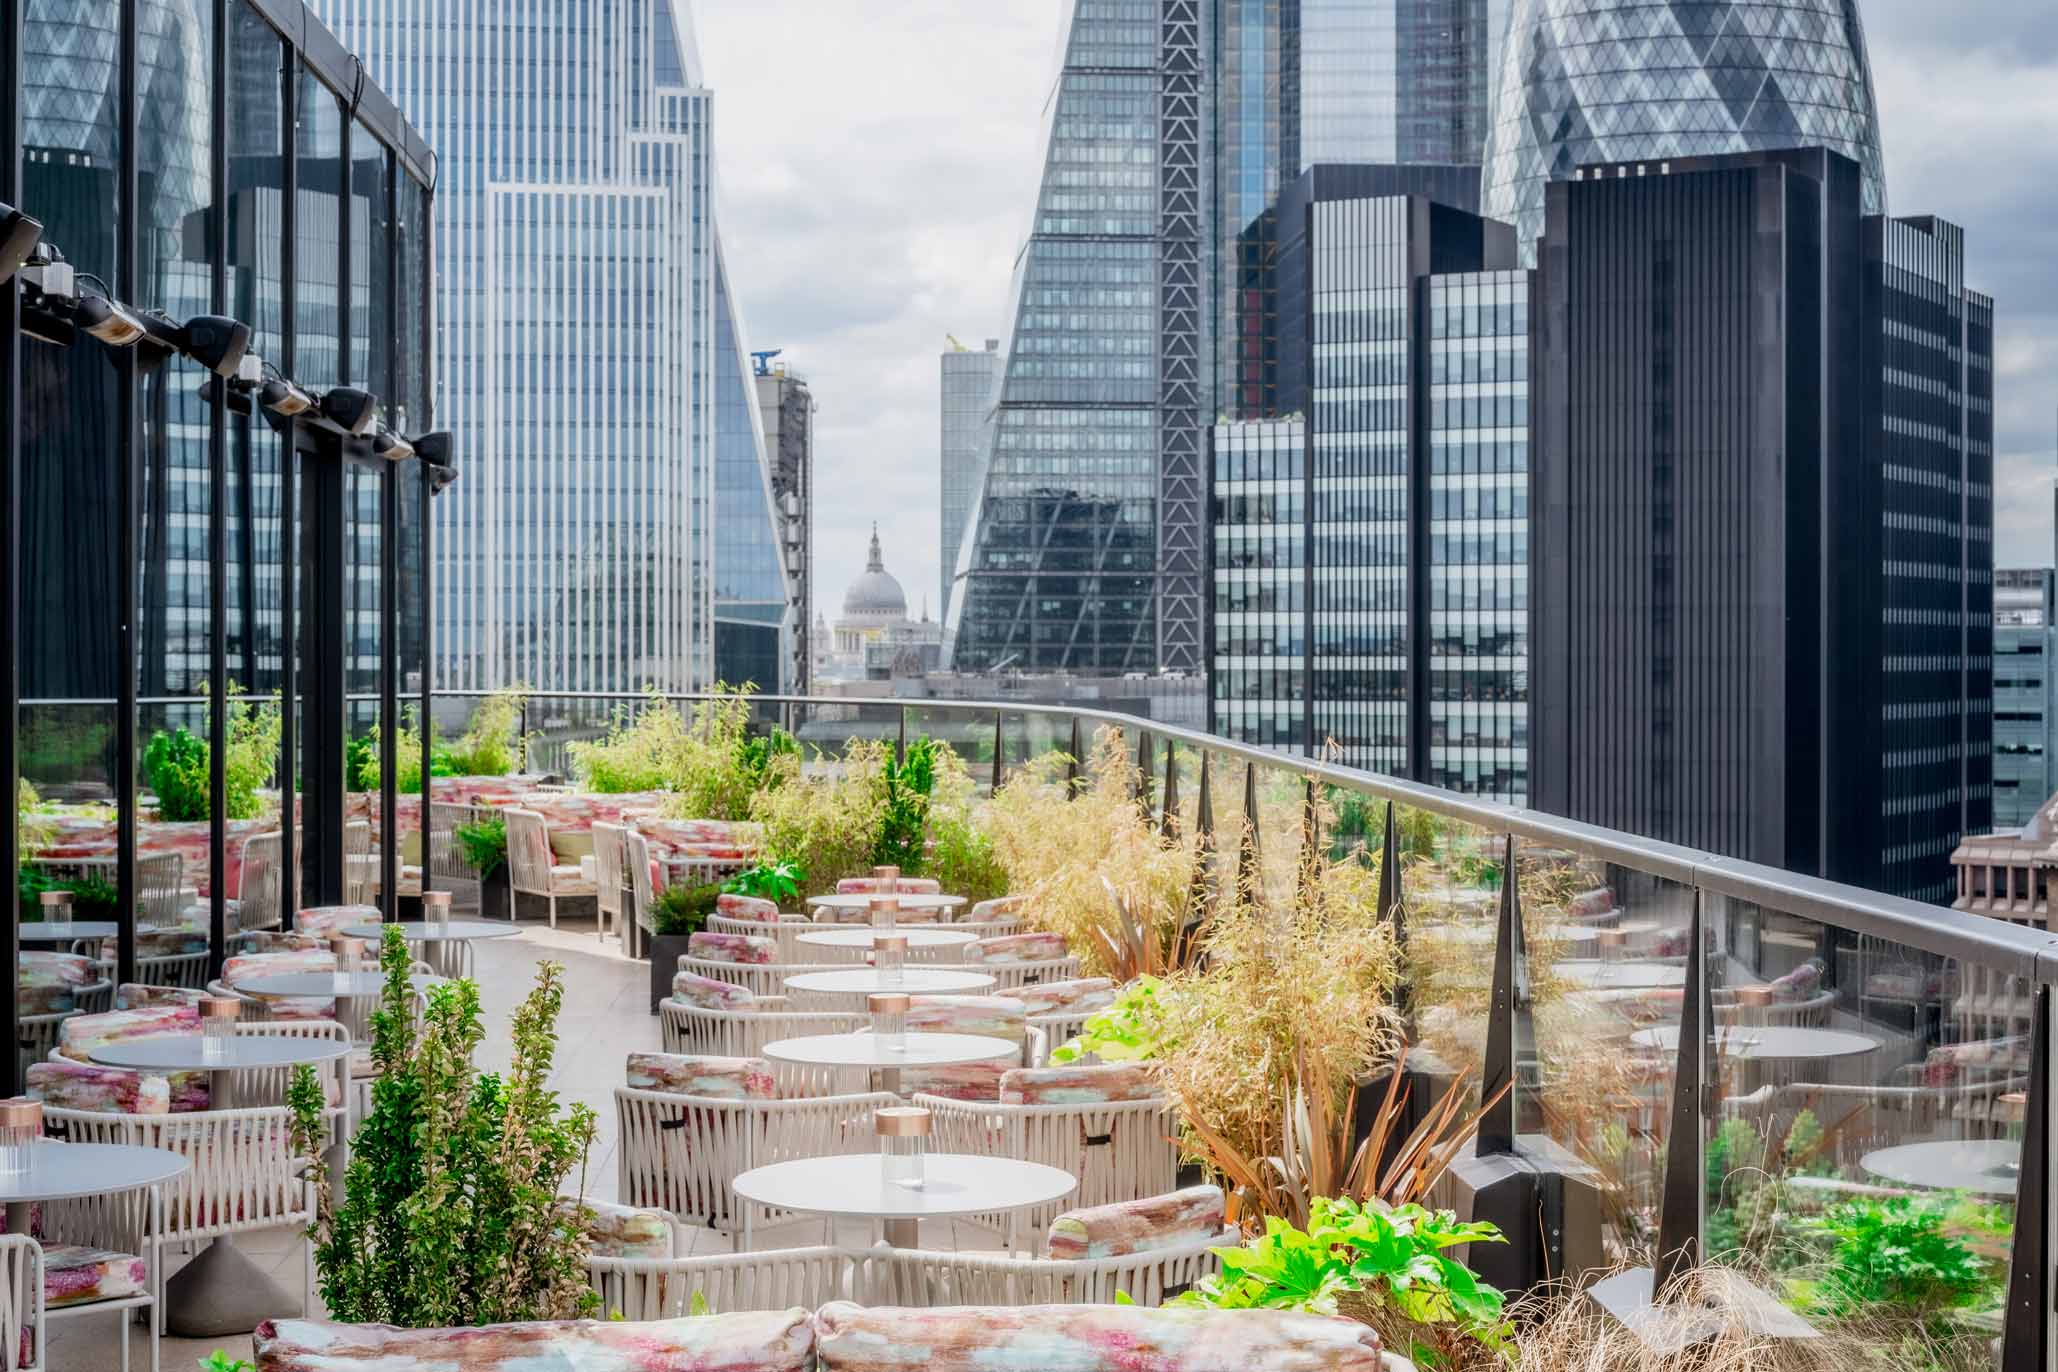 Views across The City of London from Florattica Rooftop Terrace